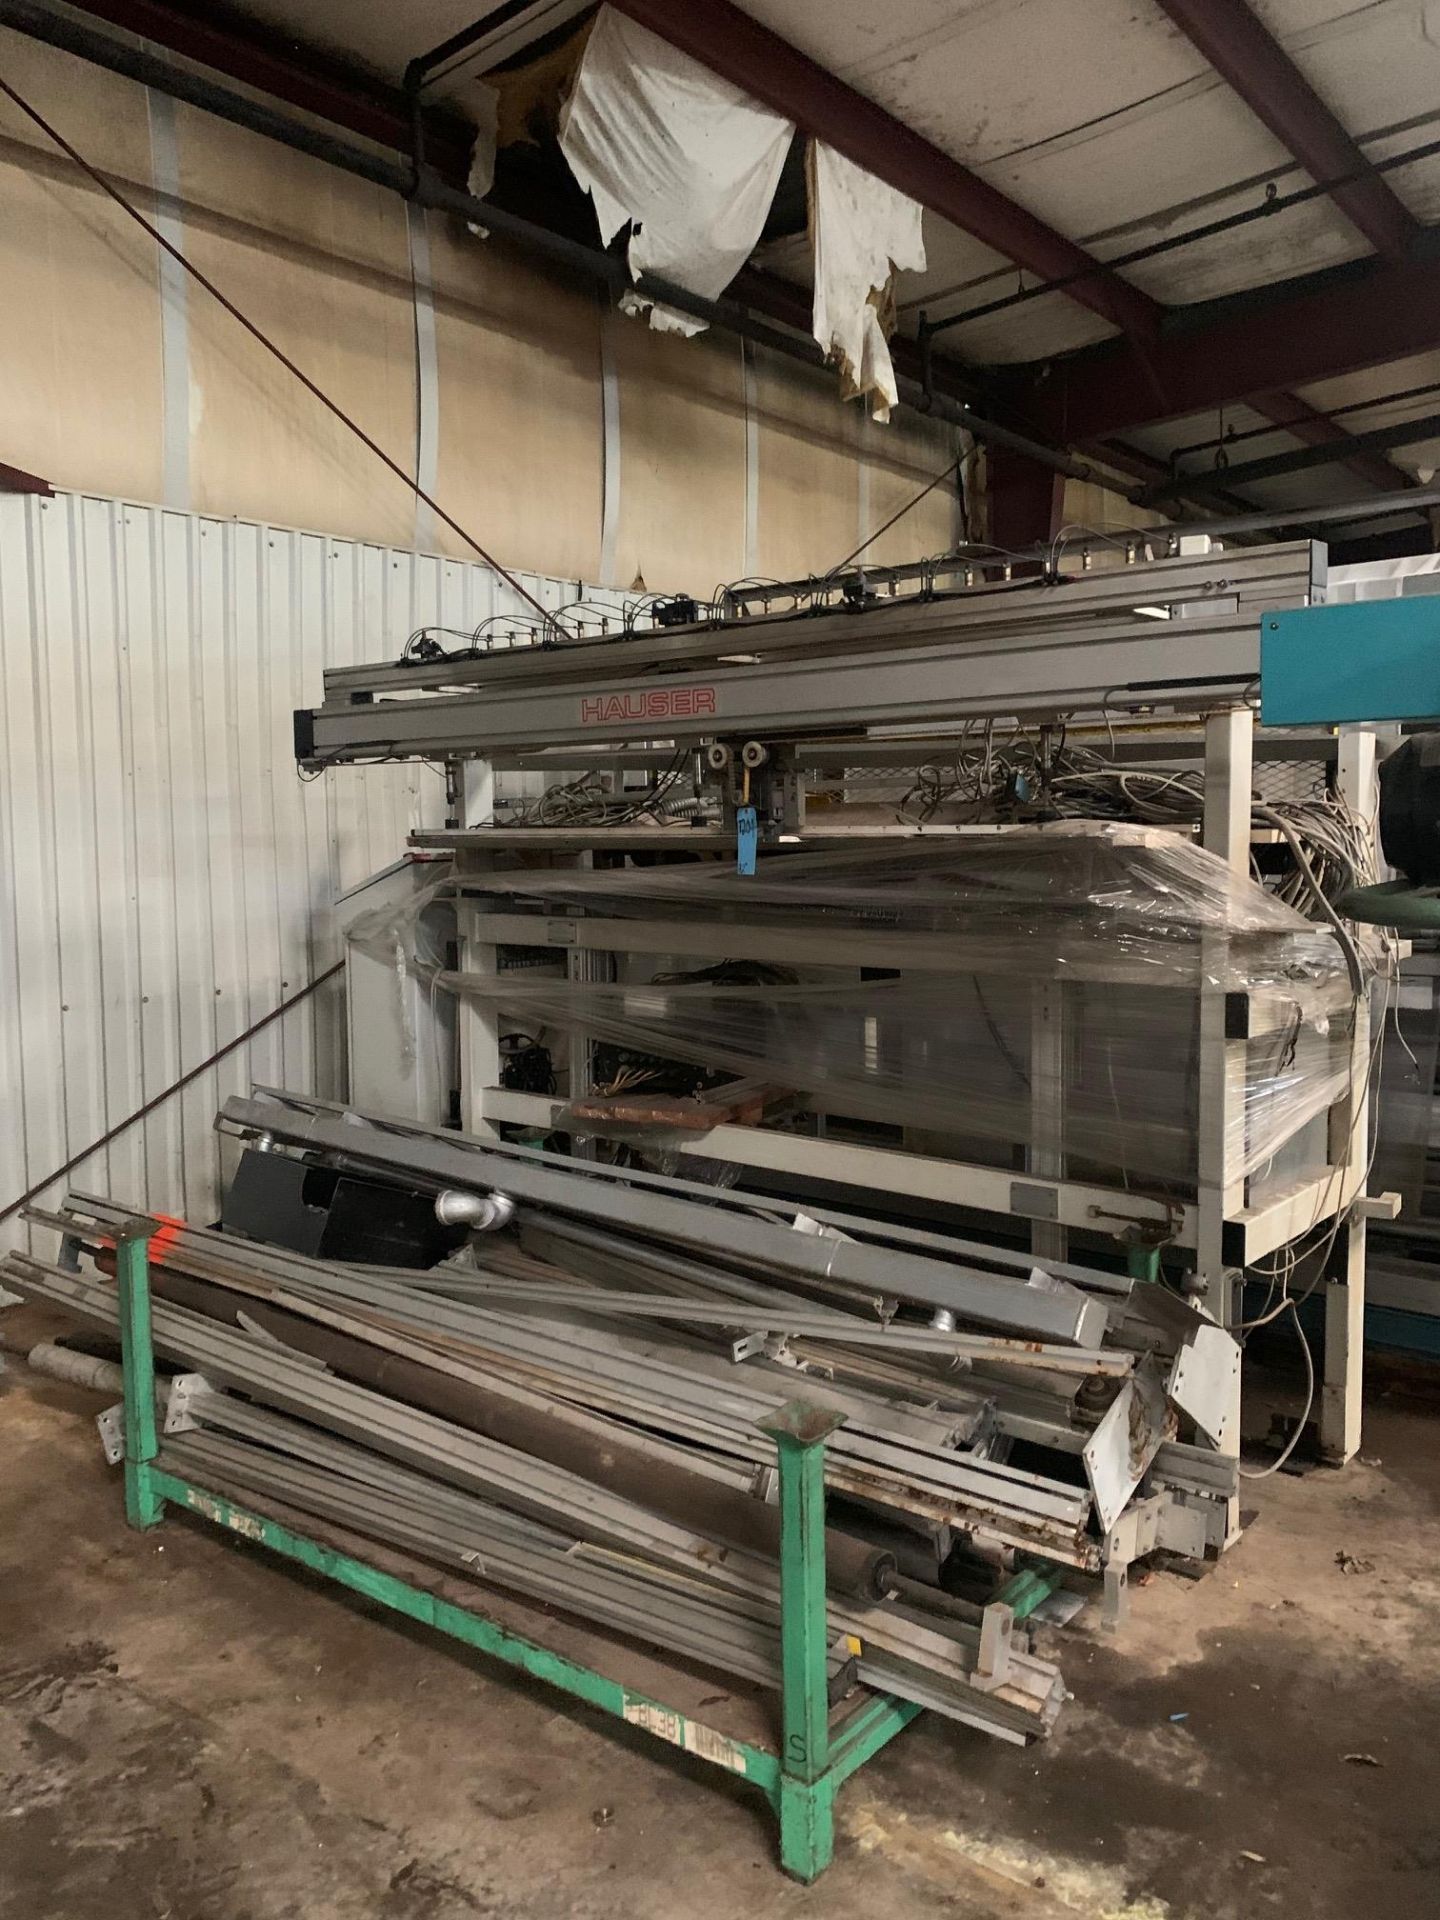 Hauser. Model Comtac 3000 Automatic Cut Panels and Stacking System, Rigging Fee: $150